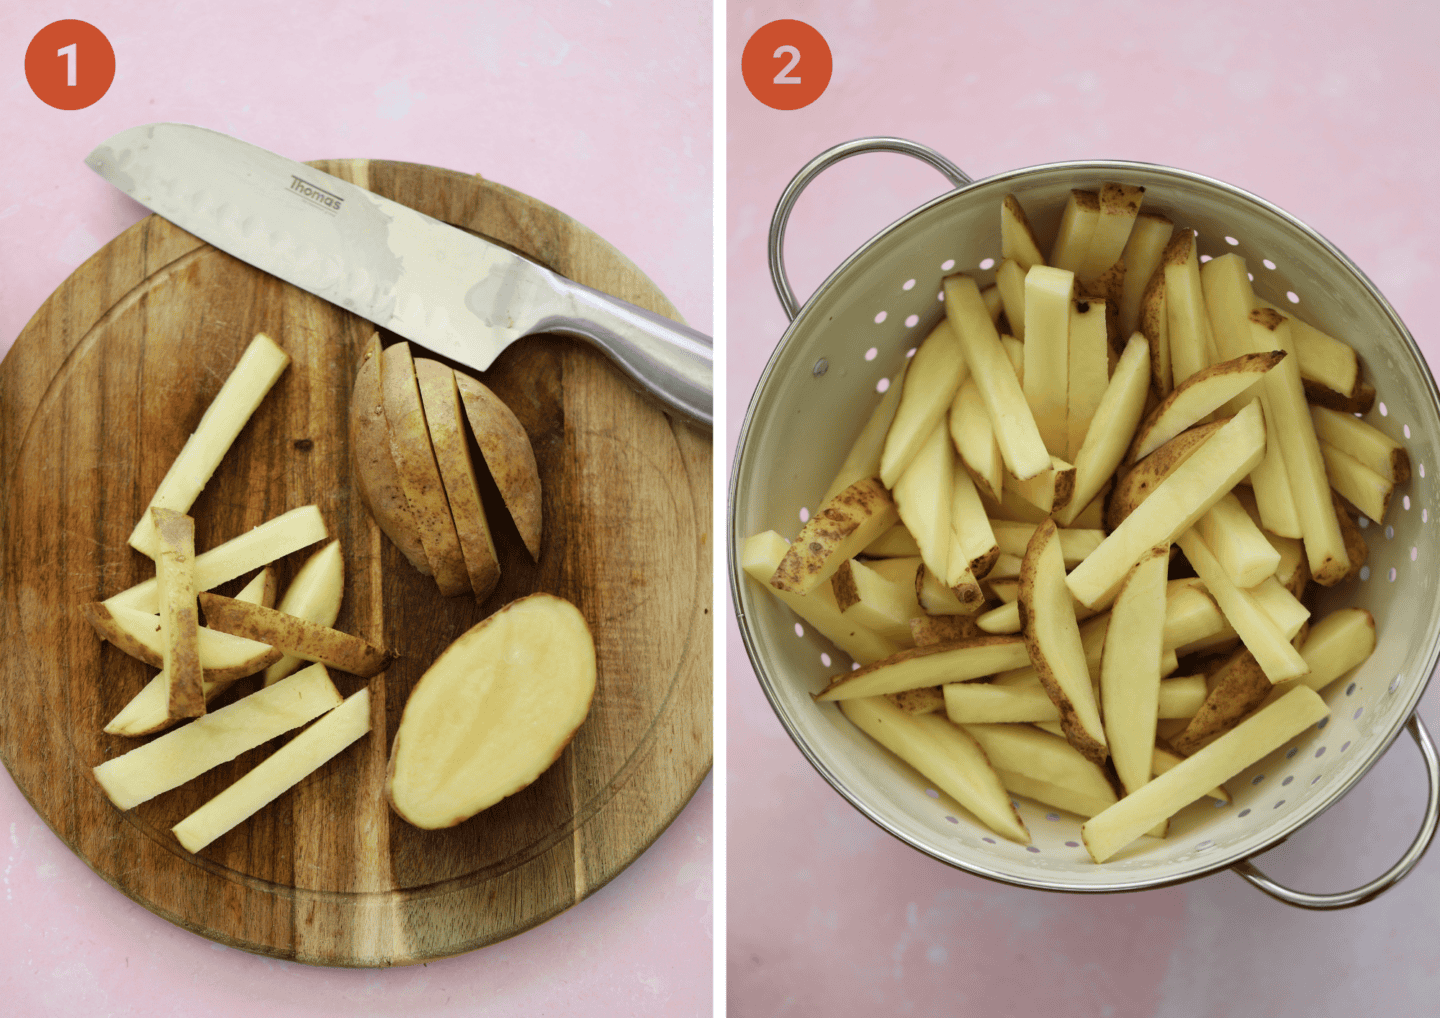 Cut the potatoes into 1cm chips then rinse in a colander.